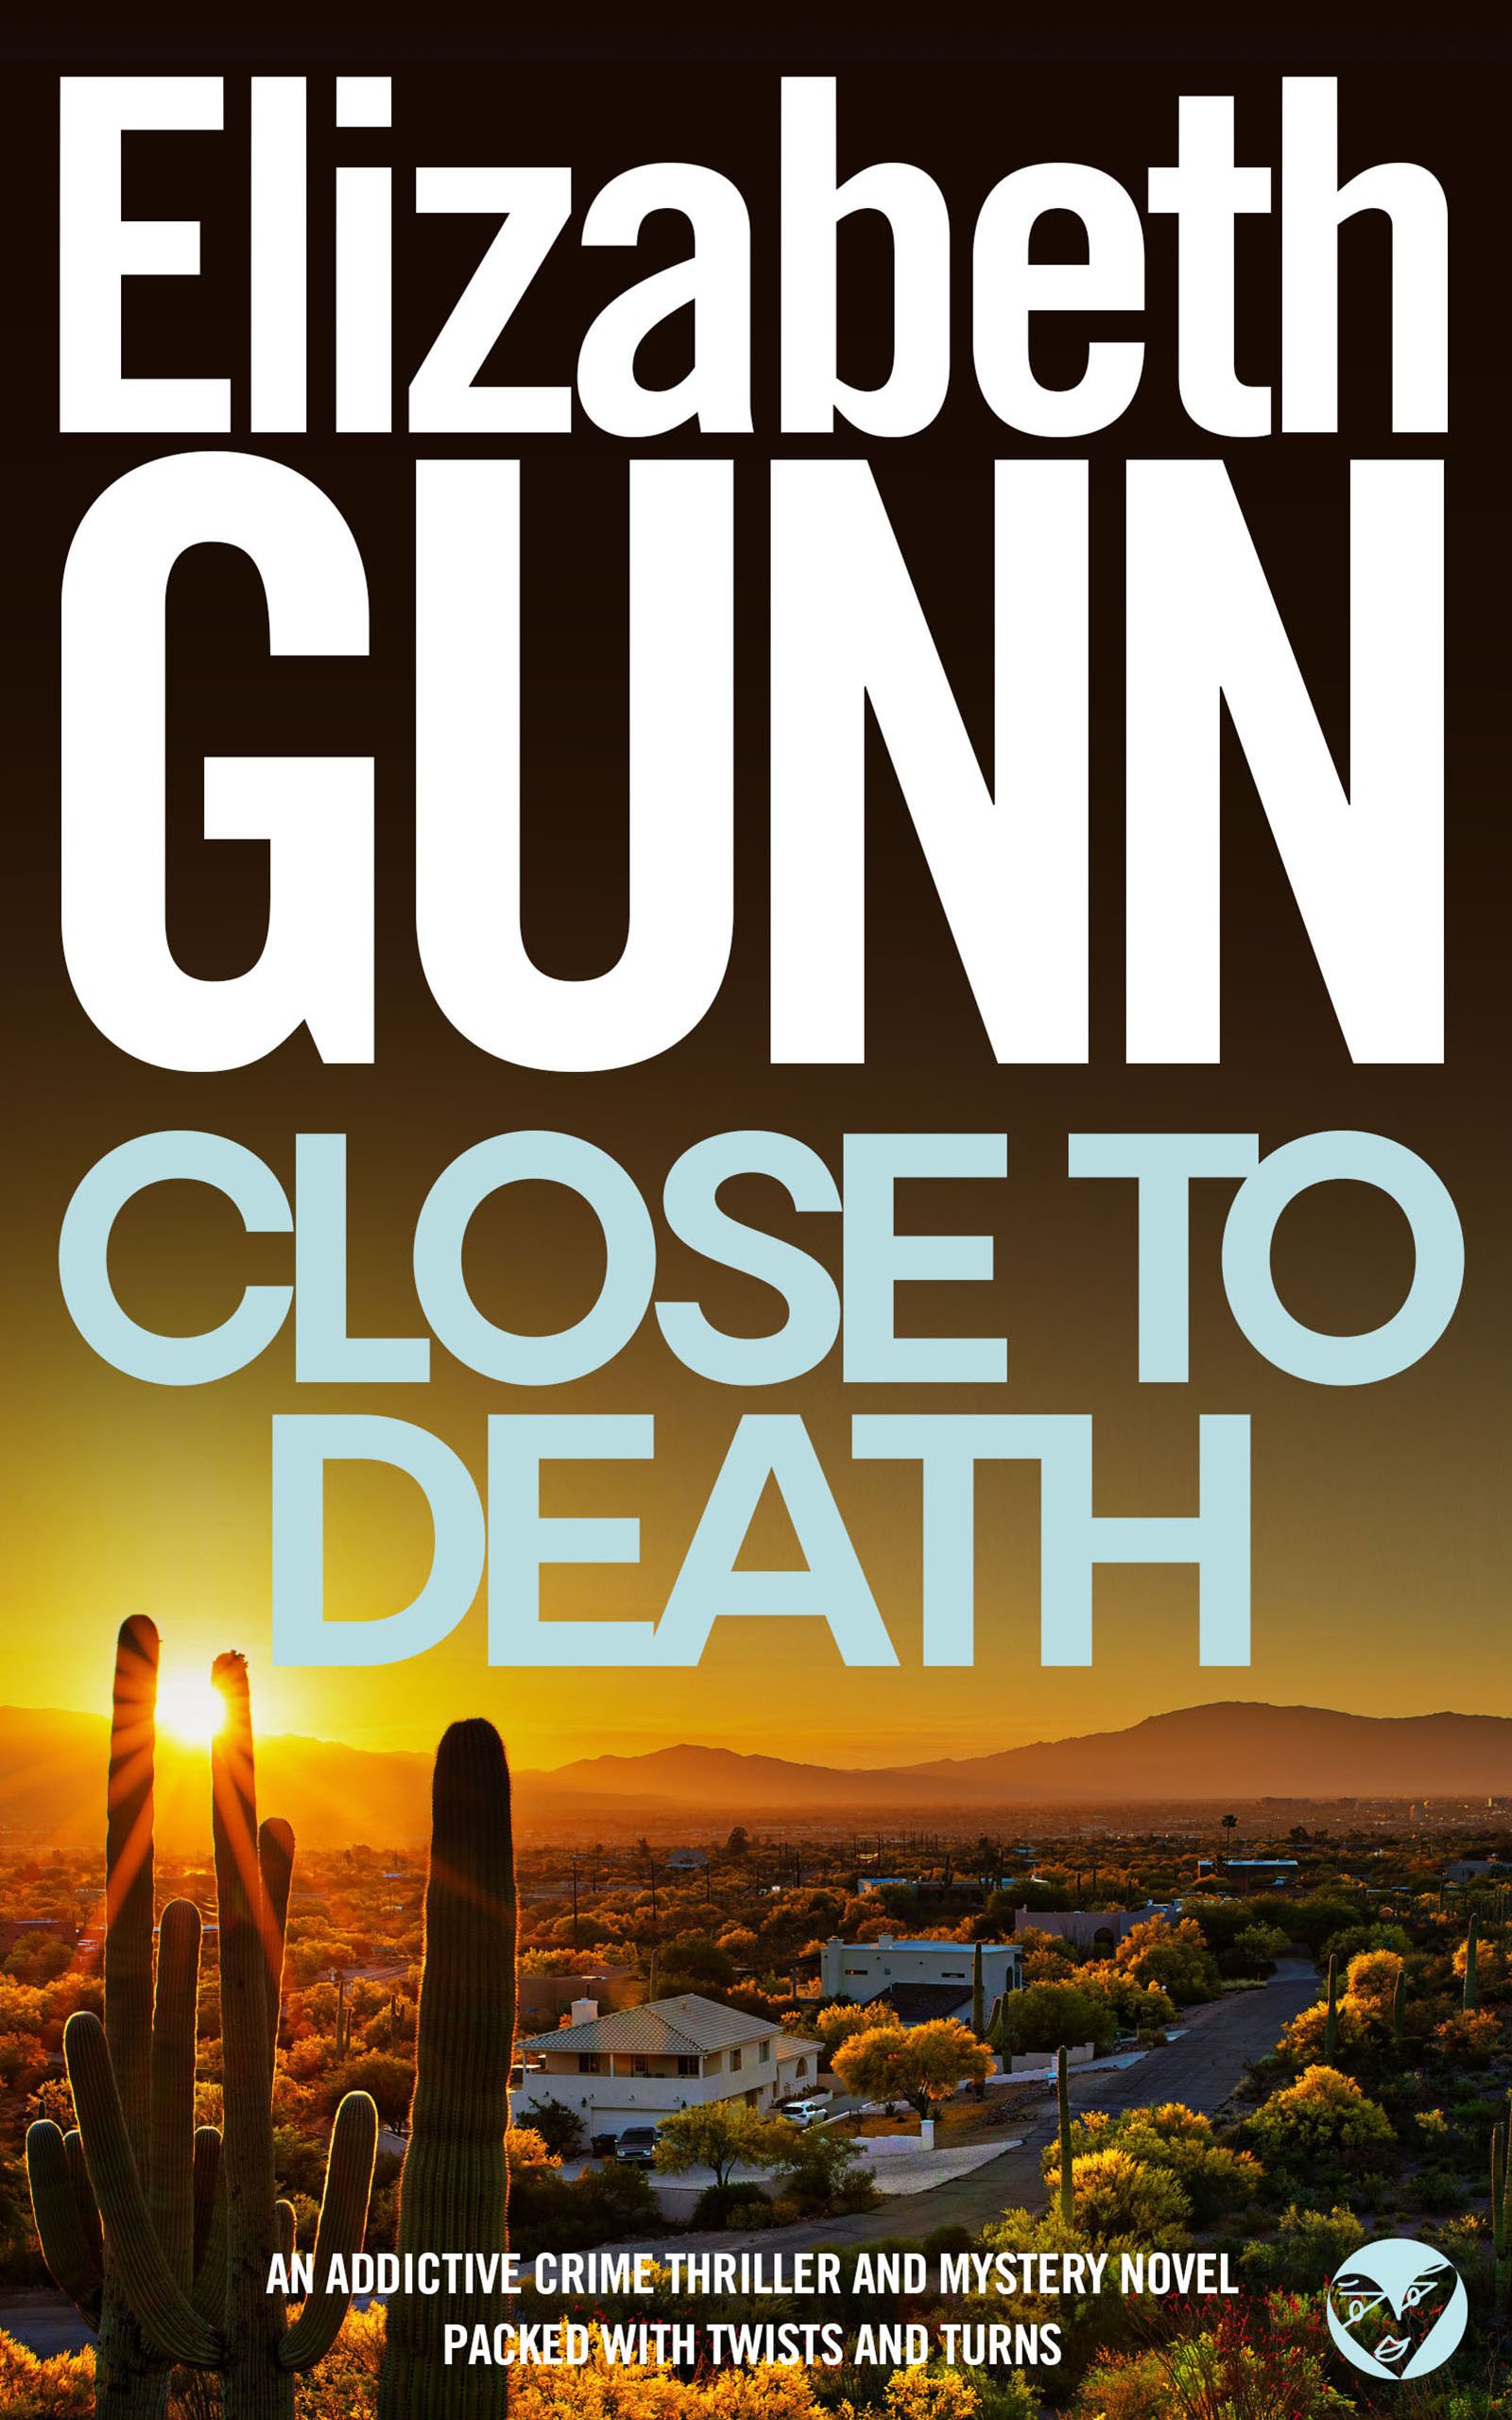 CLOSE TO DEATH cover publish.jpg